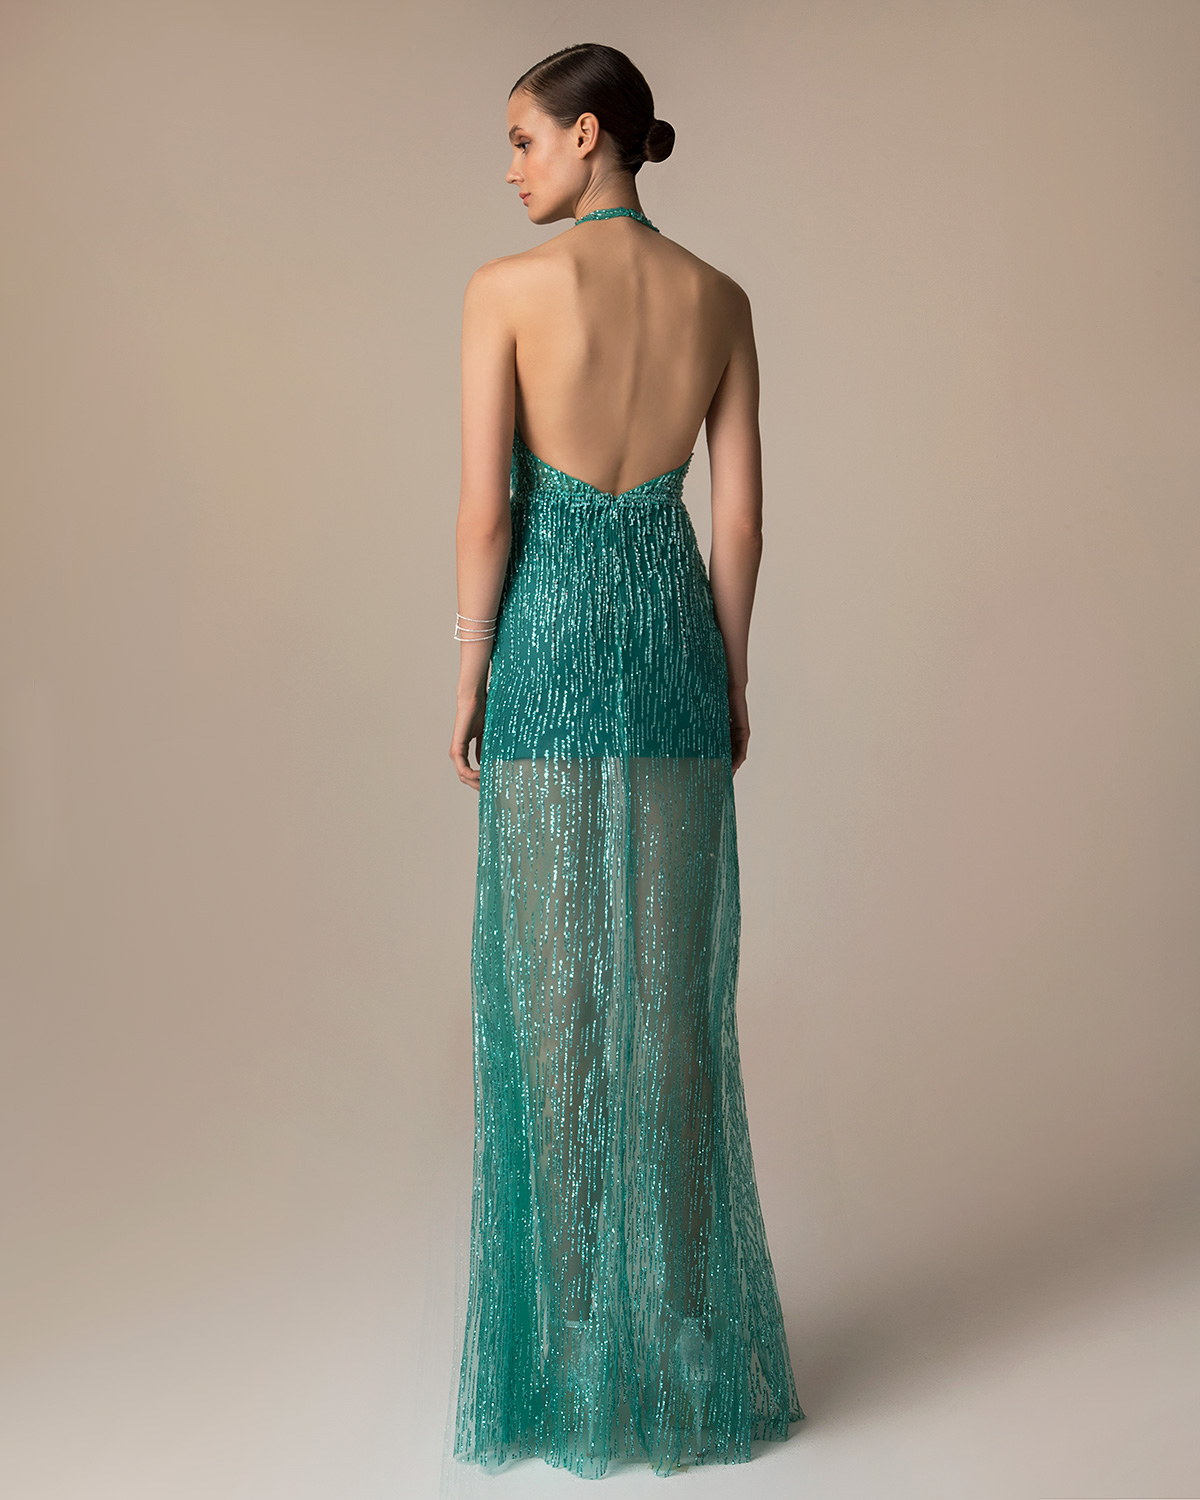 Evening Dresses / Long evening fully beaded dress with open back